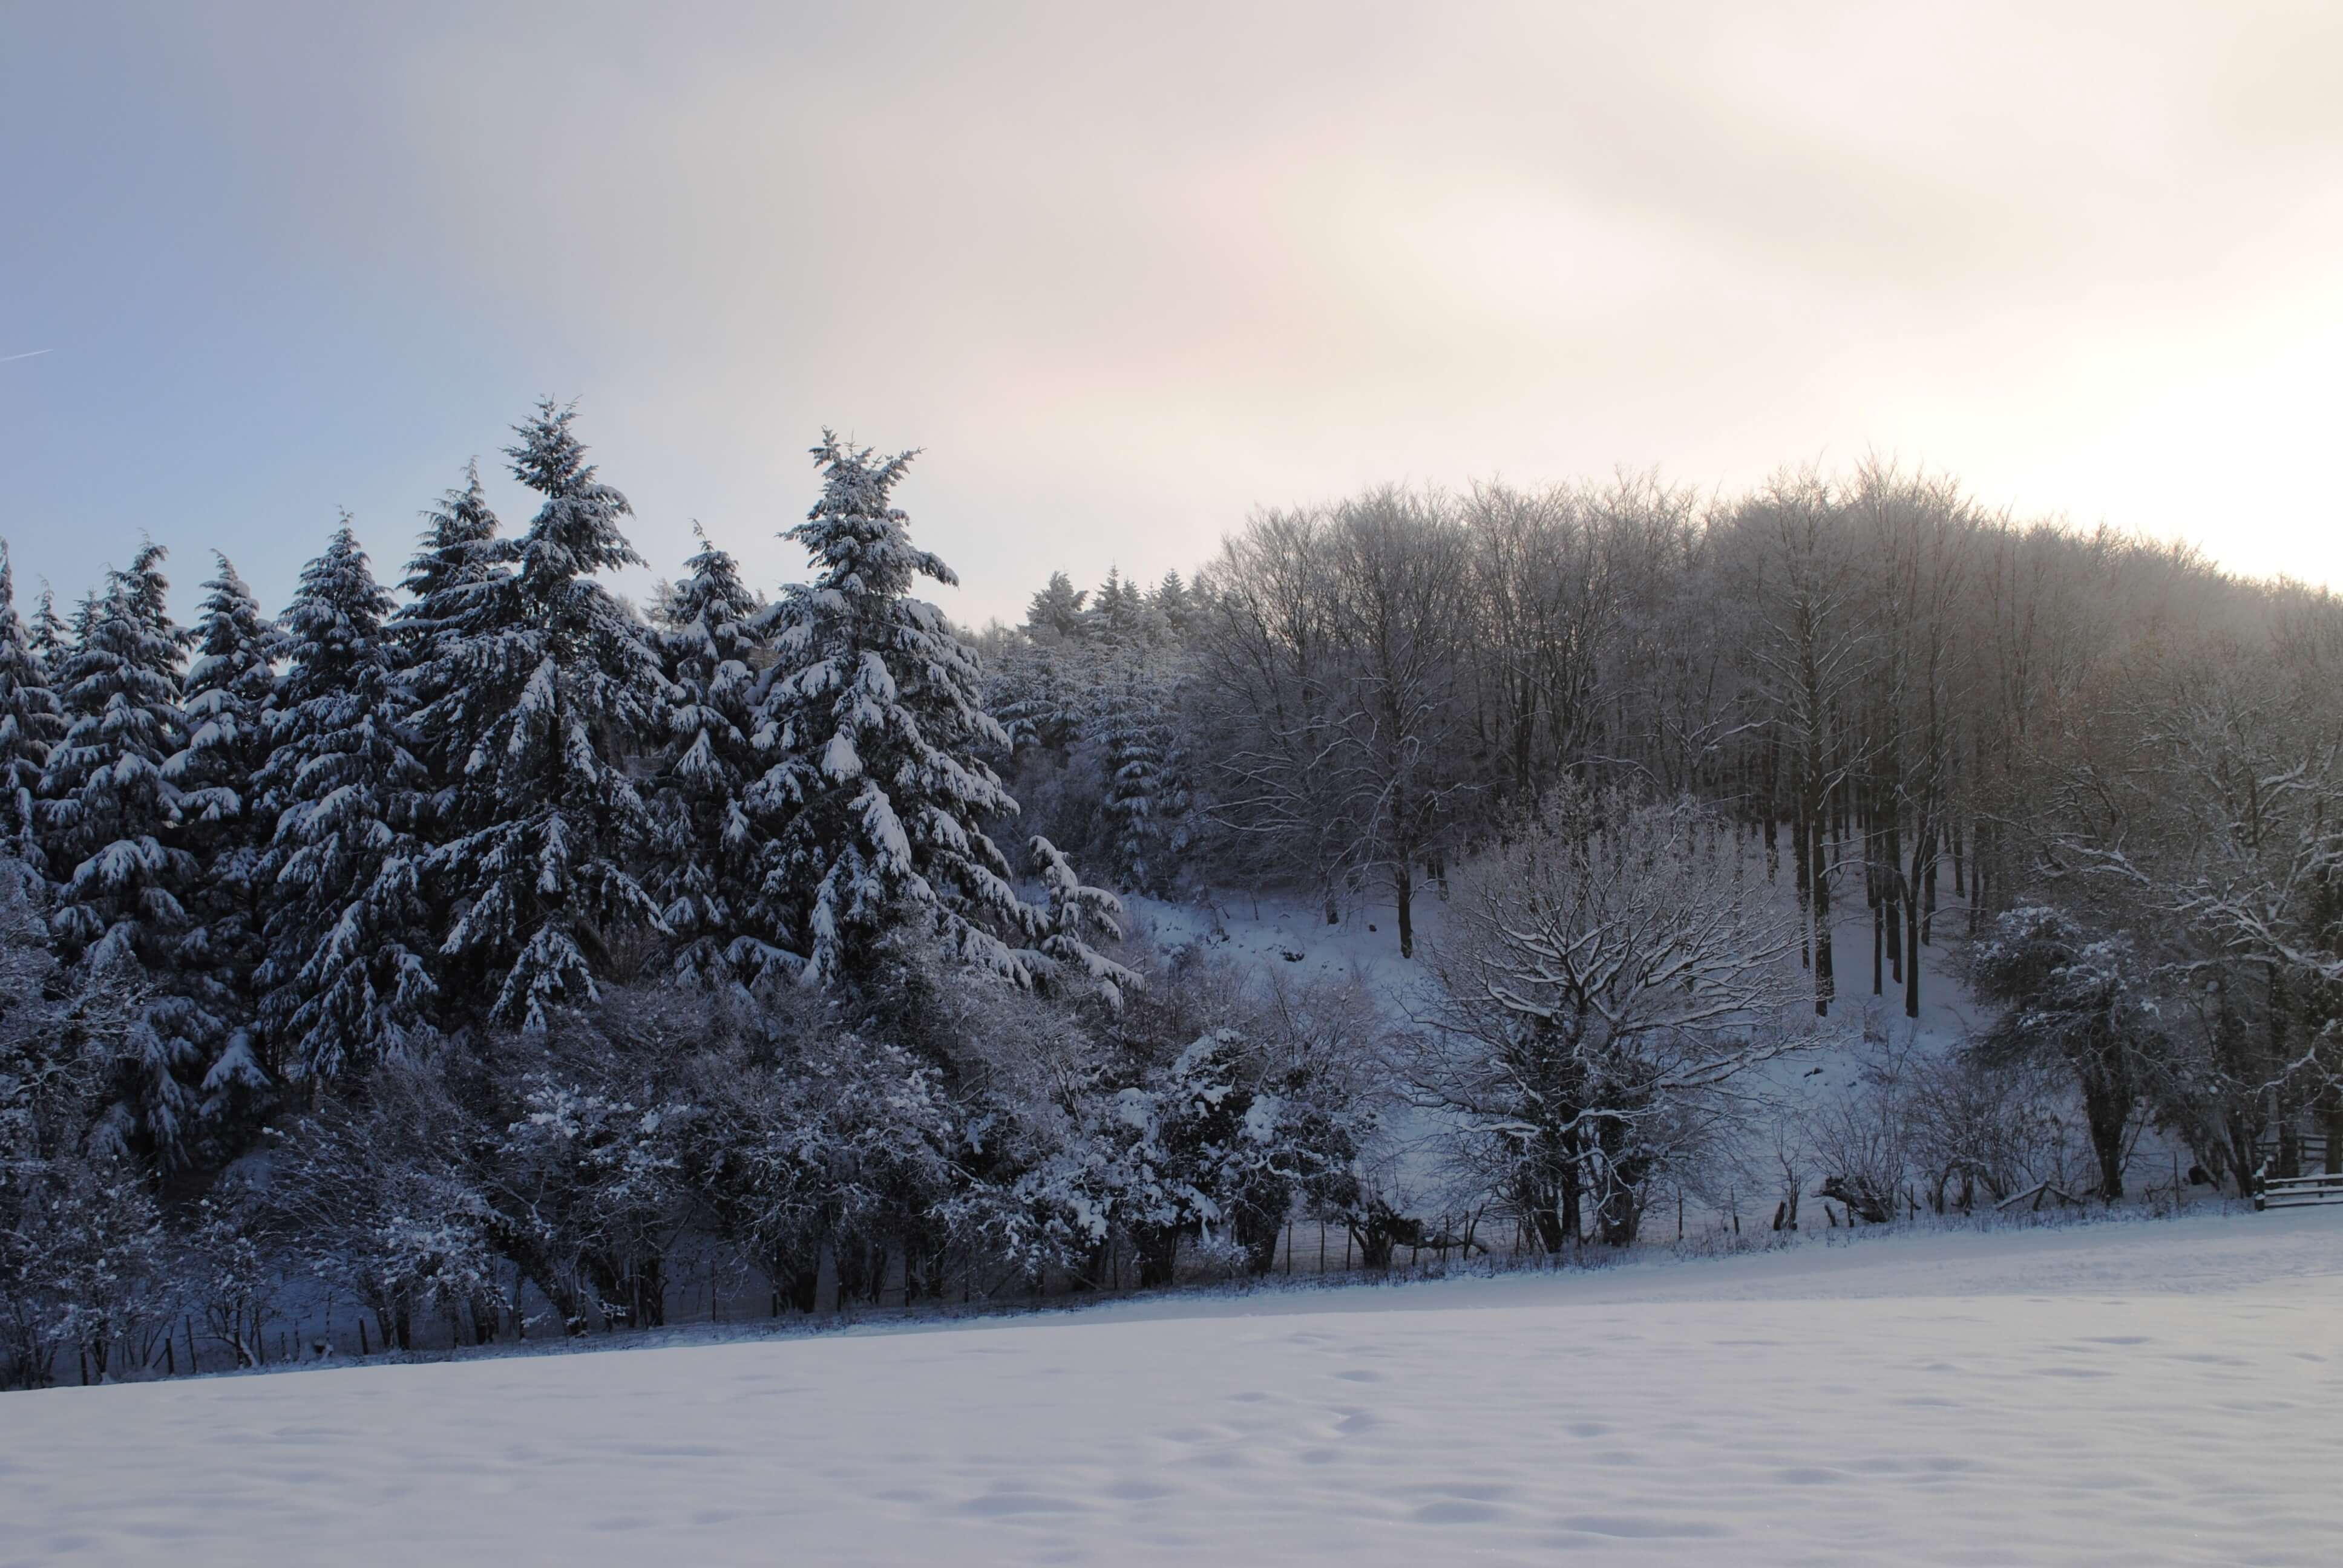 Snowy field with King's Wood in near distance. Trees are covered with snow, sky is light blue and grey.